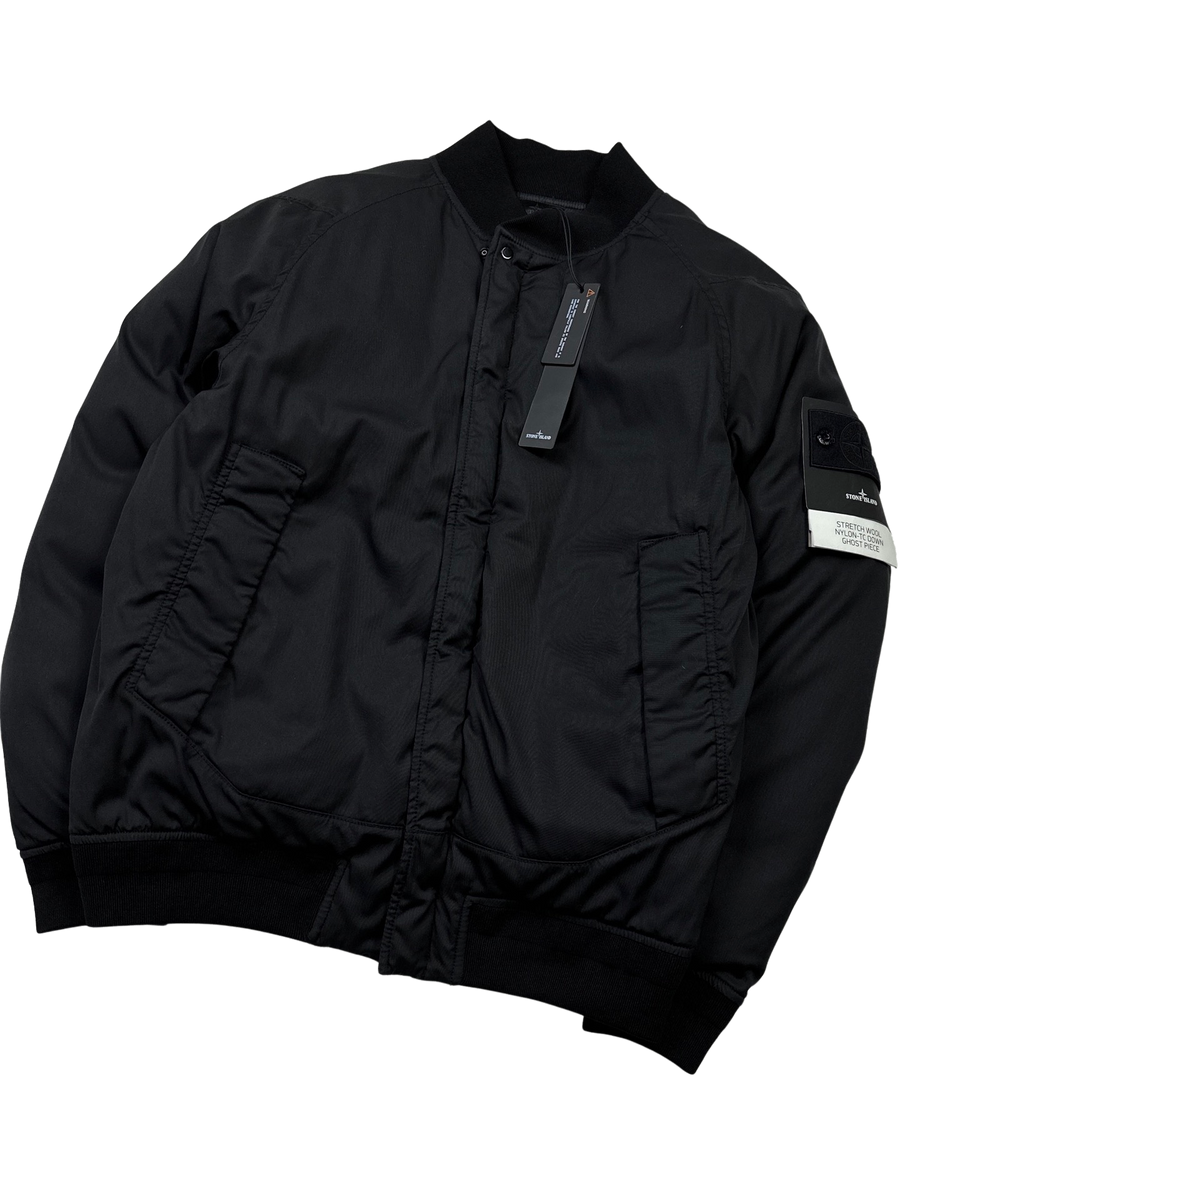 STONE ISLAND GHOST DOWN BOMBER JACKET